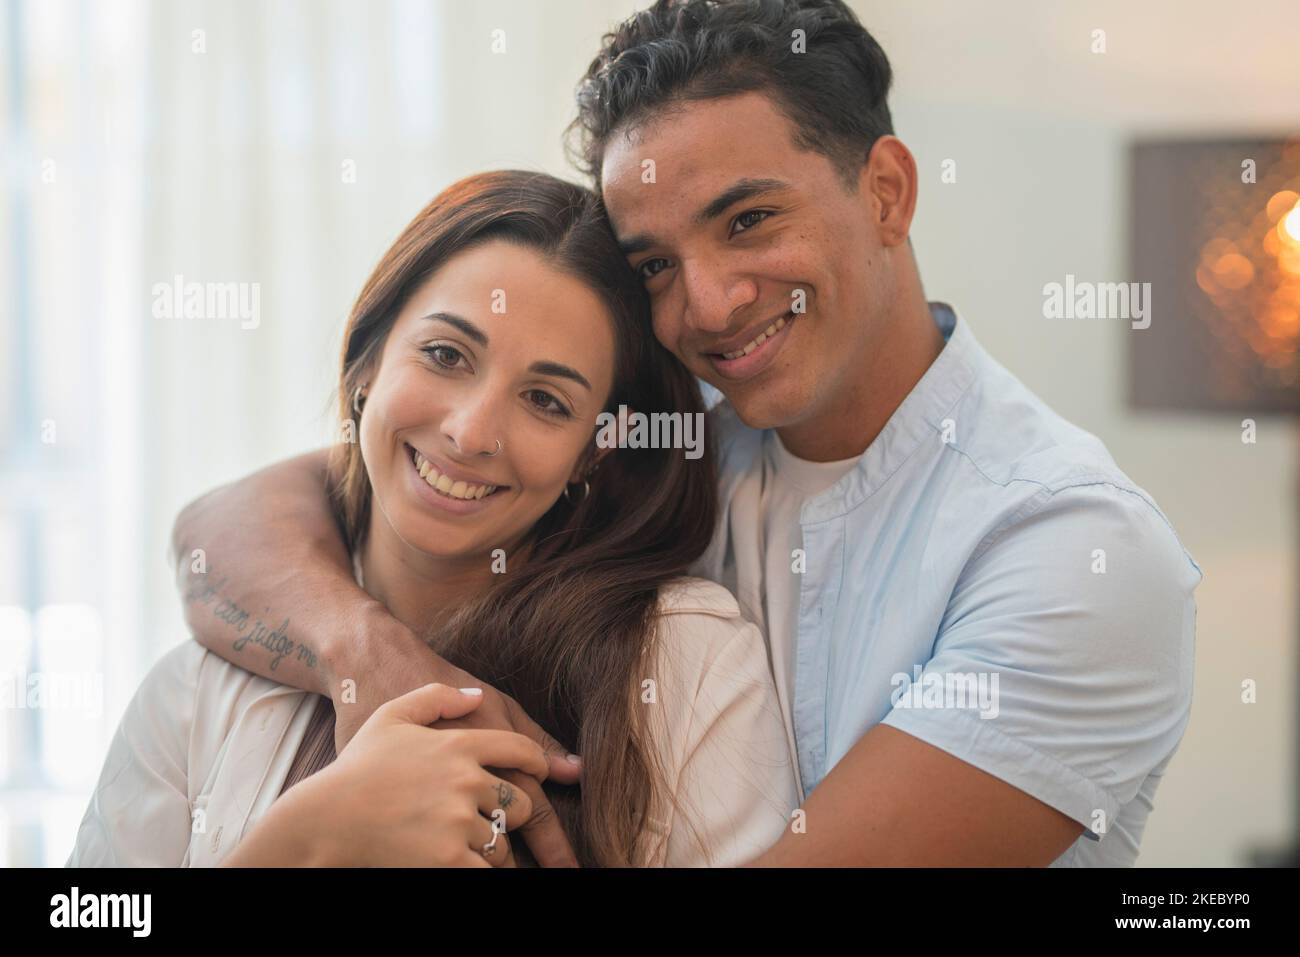 Concept of young interracial couple in love and relationship. Boy hug and protect girlfriend at home. Life and future together man and woman. New apartment happiness satisfaction portrait. Smile Stock Photo